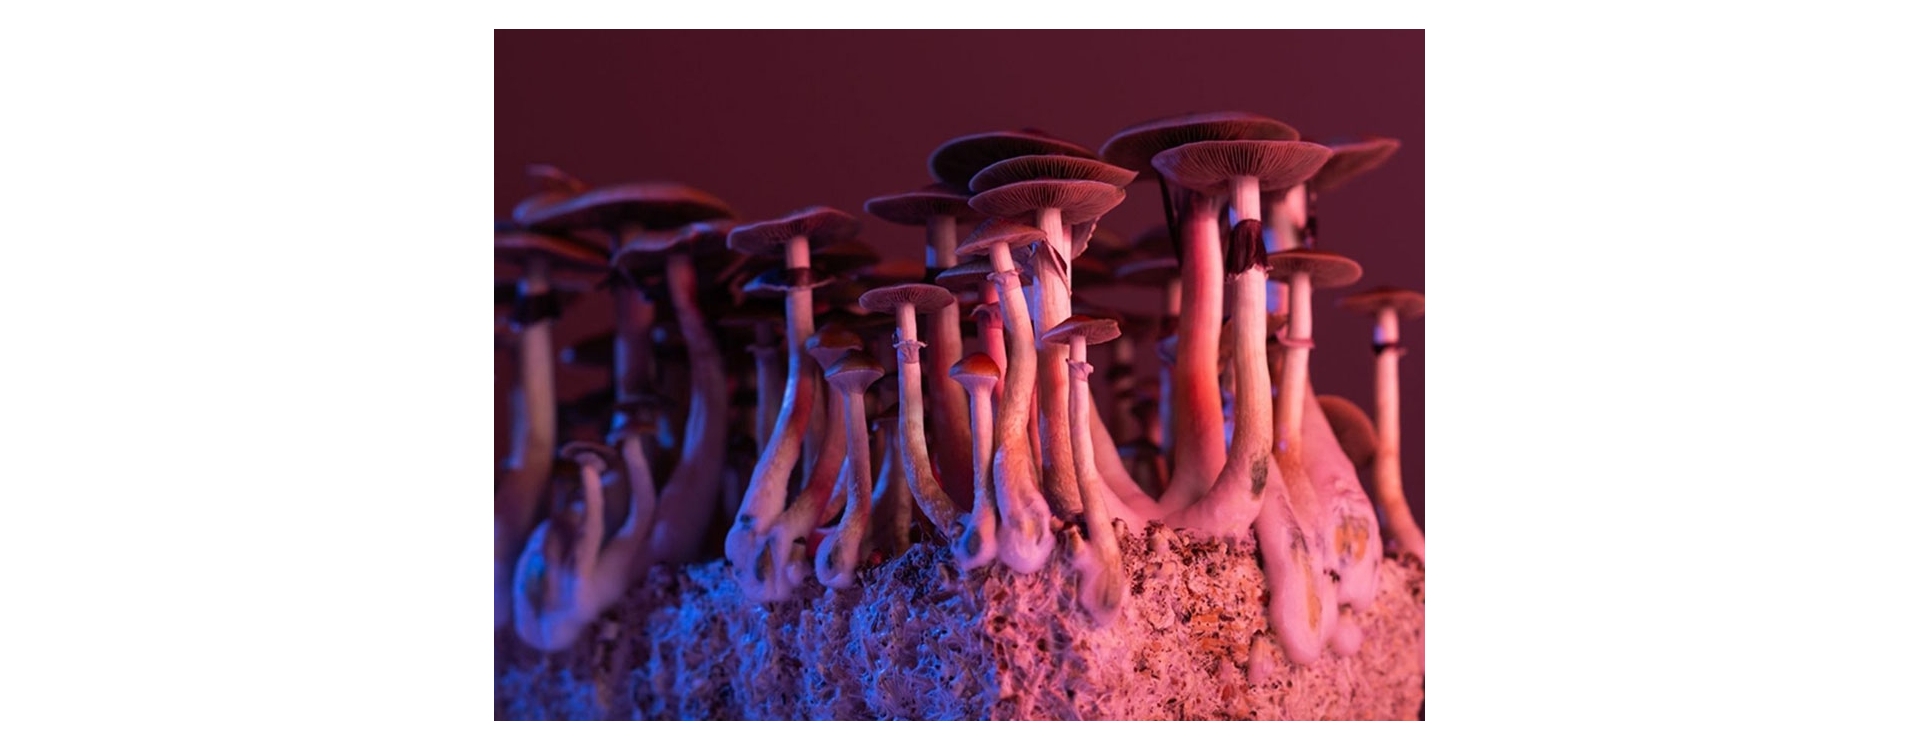 Can Psychedelic Mushrooms Treat Depression? Research Says Yes.